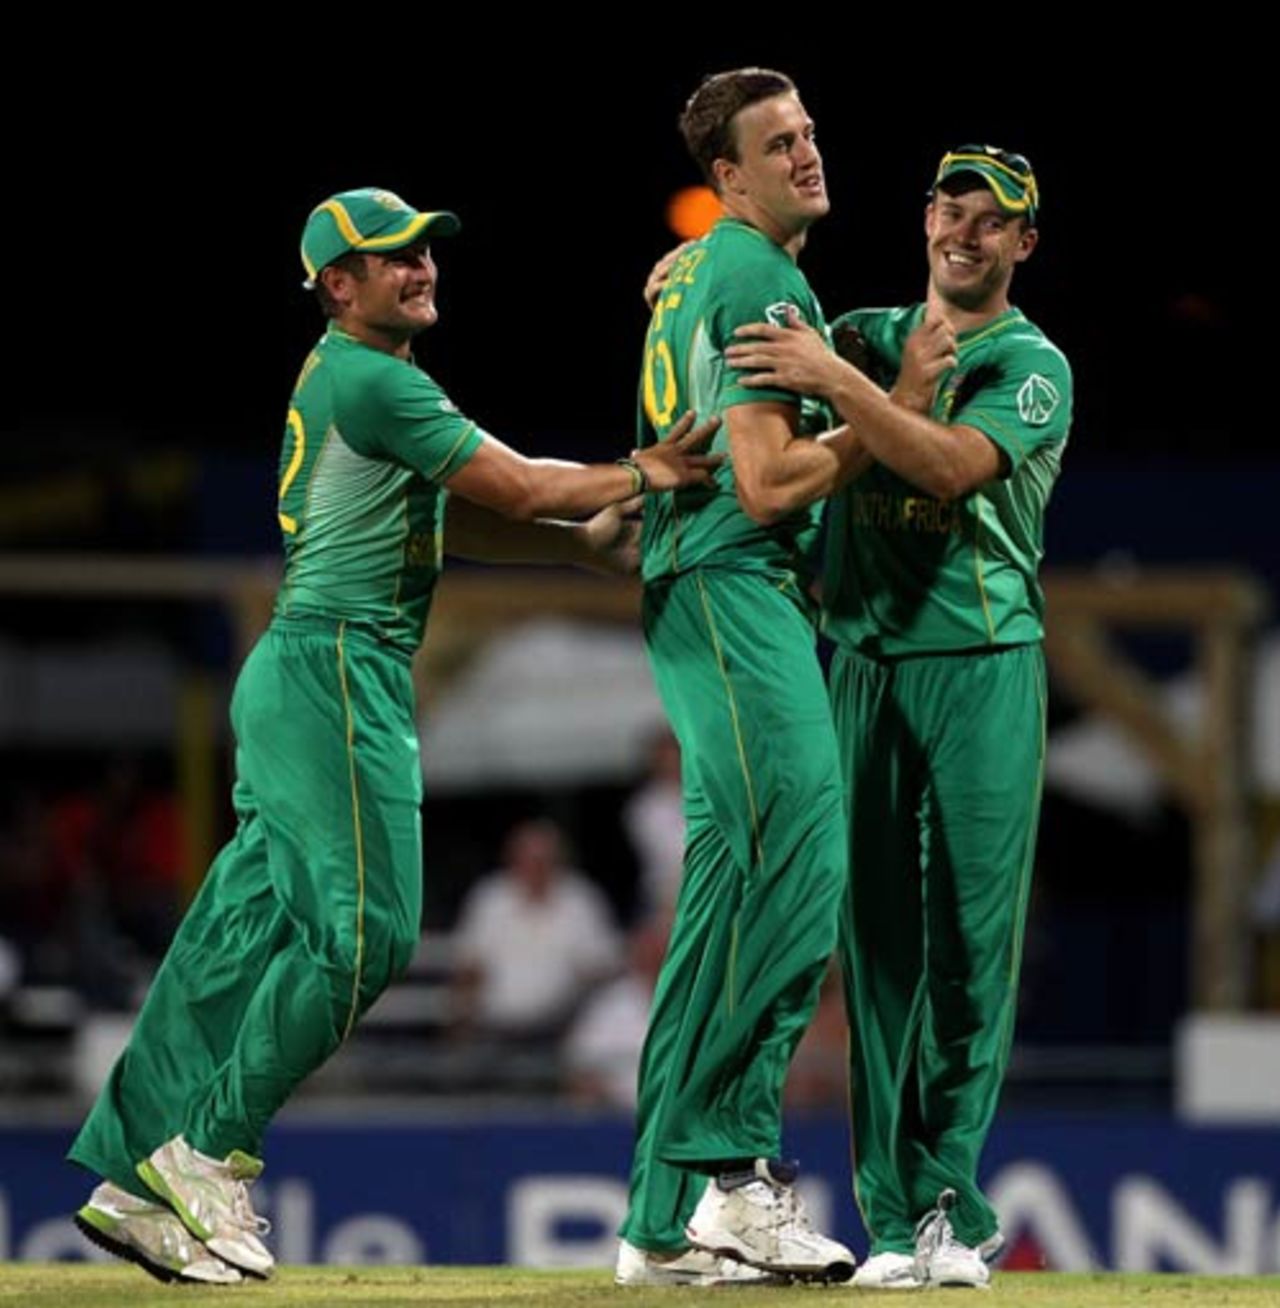 Morne Morkel was the toast of the team with 4 for 20, Afghanistan v South Africa, ICC World Twenty20, Bridgetown, May 5, 2010